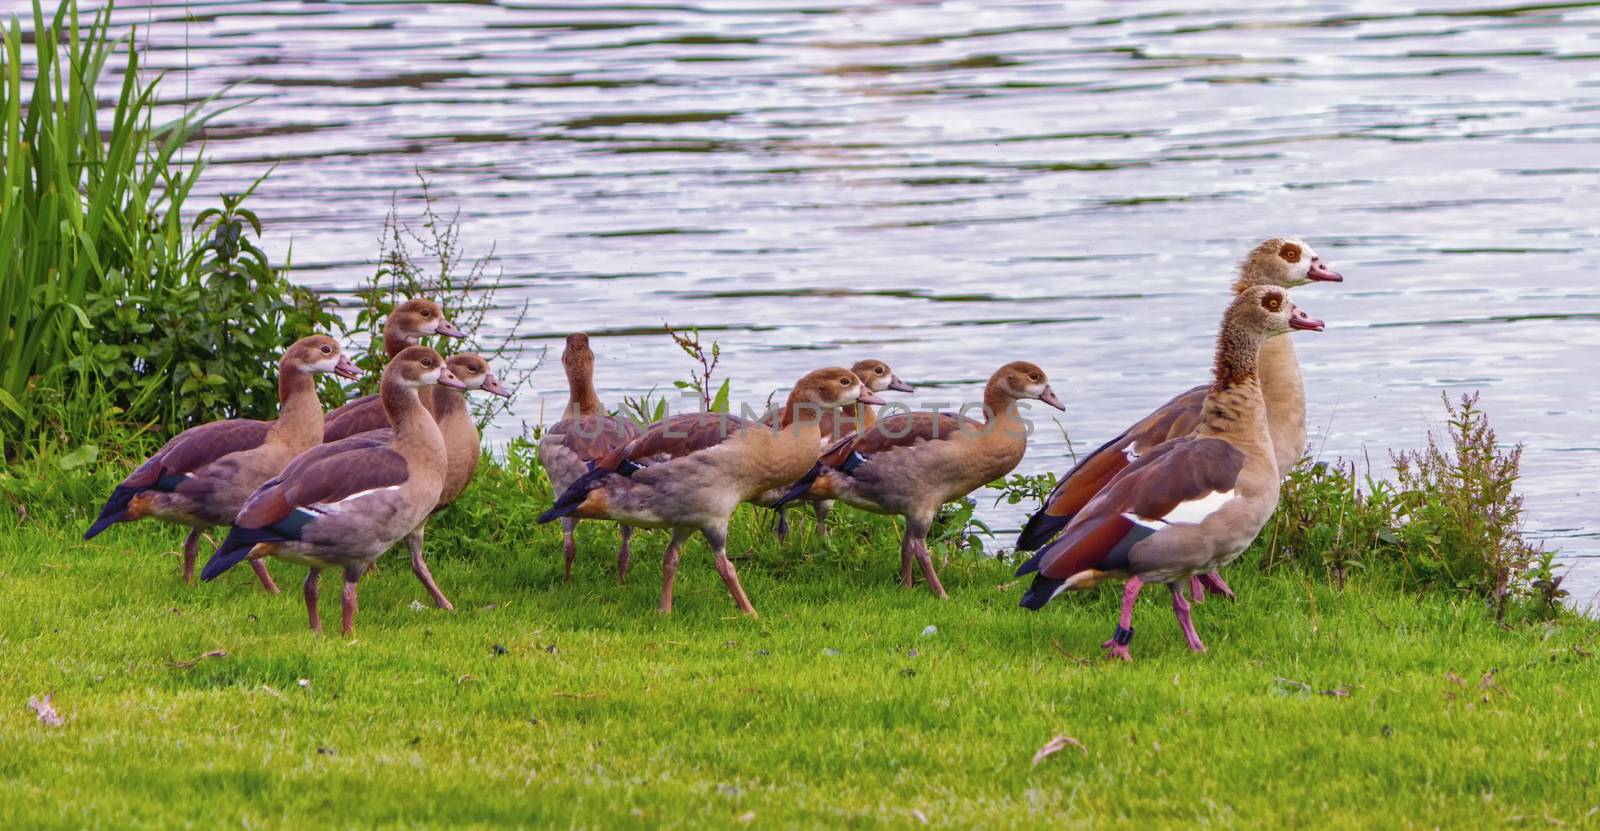 Egyptian goose, alopochen aegyptiacus,and babies walking on the grass near the water